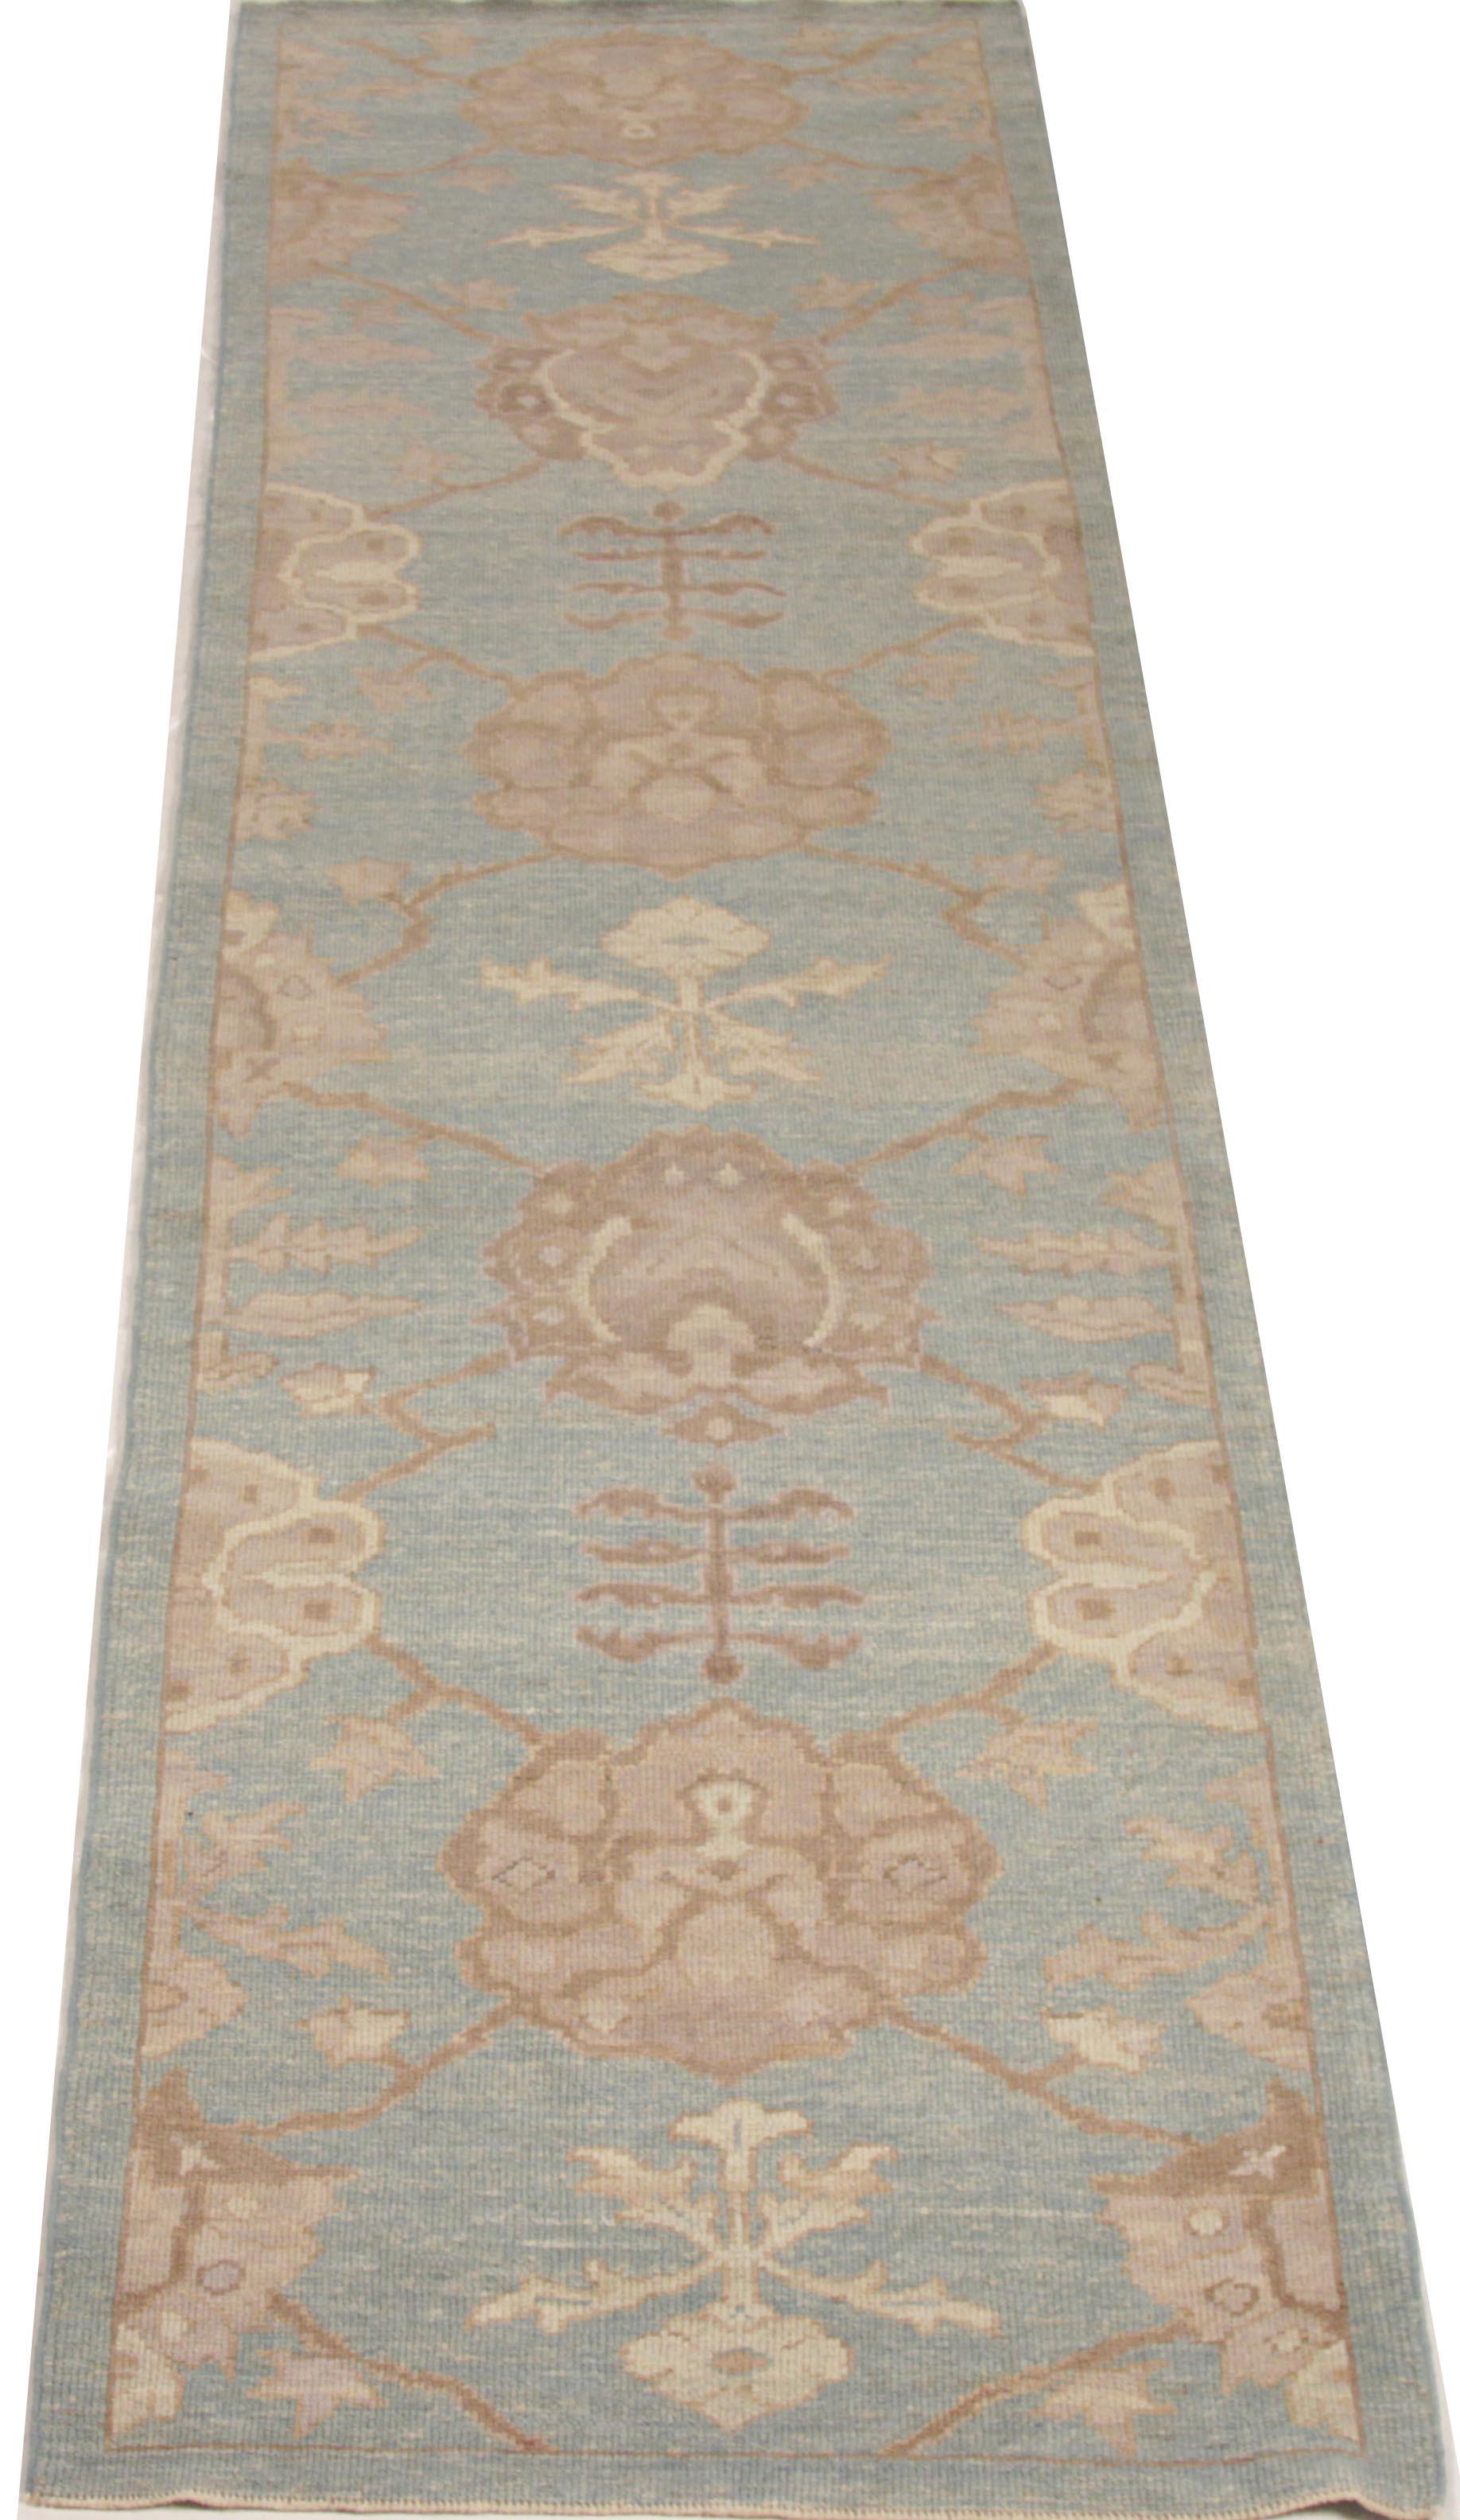 Contemporary Oushak Persian Rug in Blue with Brown and Beige Flower Motif 3